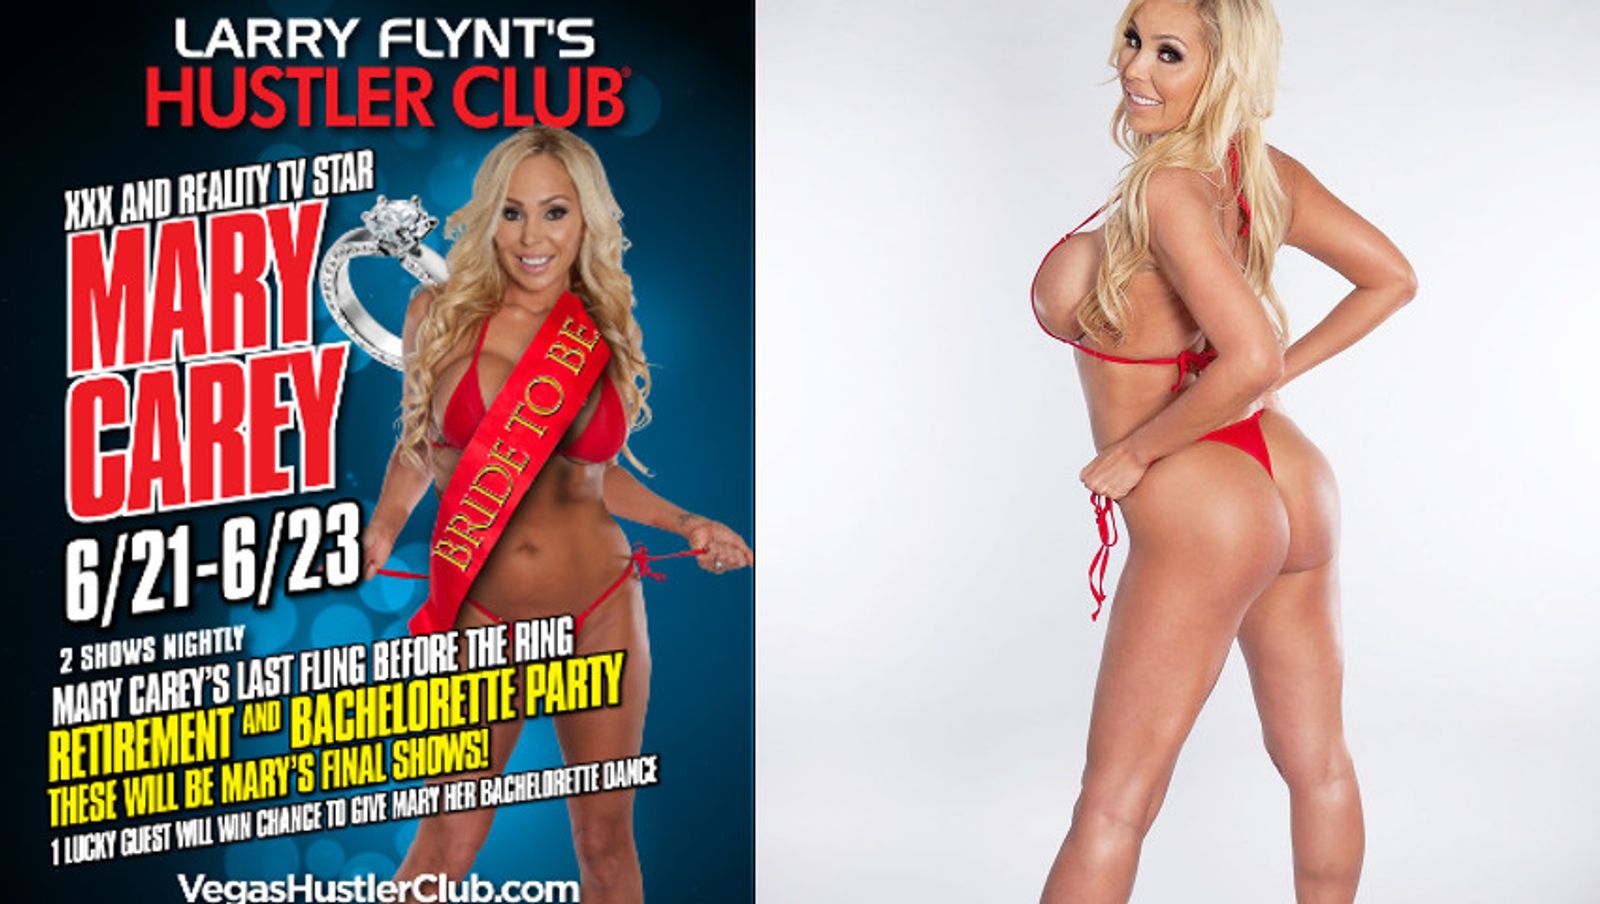 Mary Carey to Perform Final Feature Shows at Hustler Club